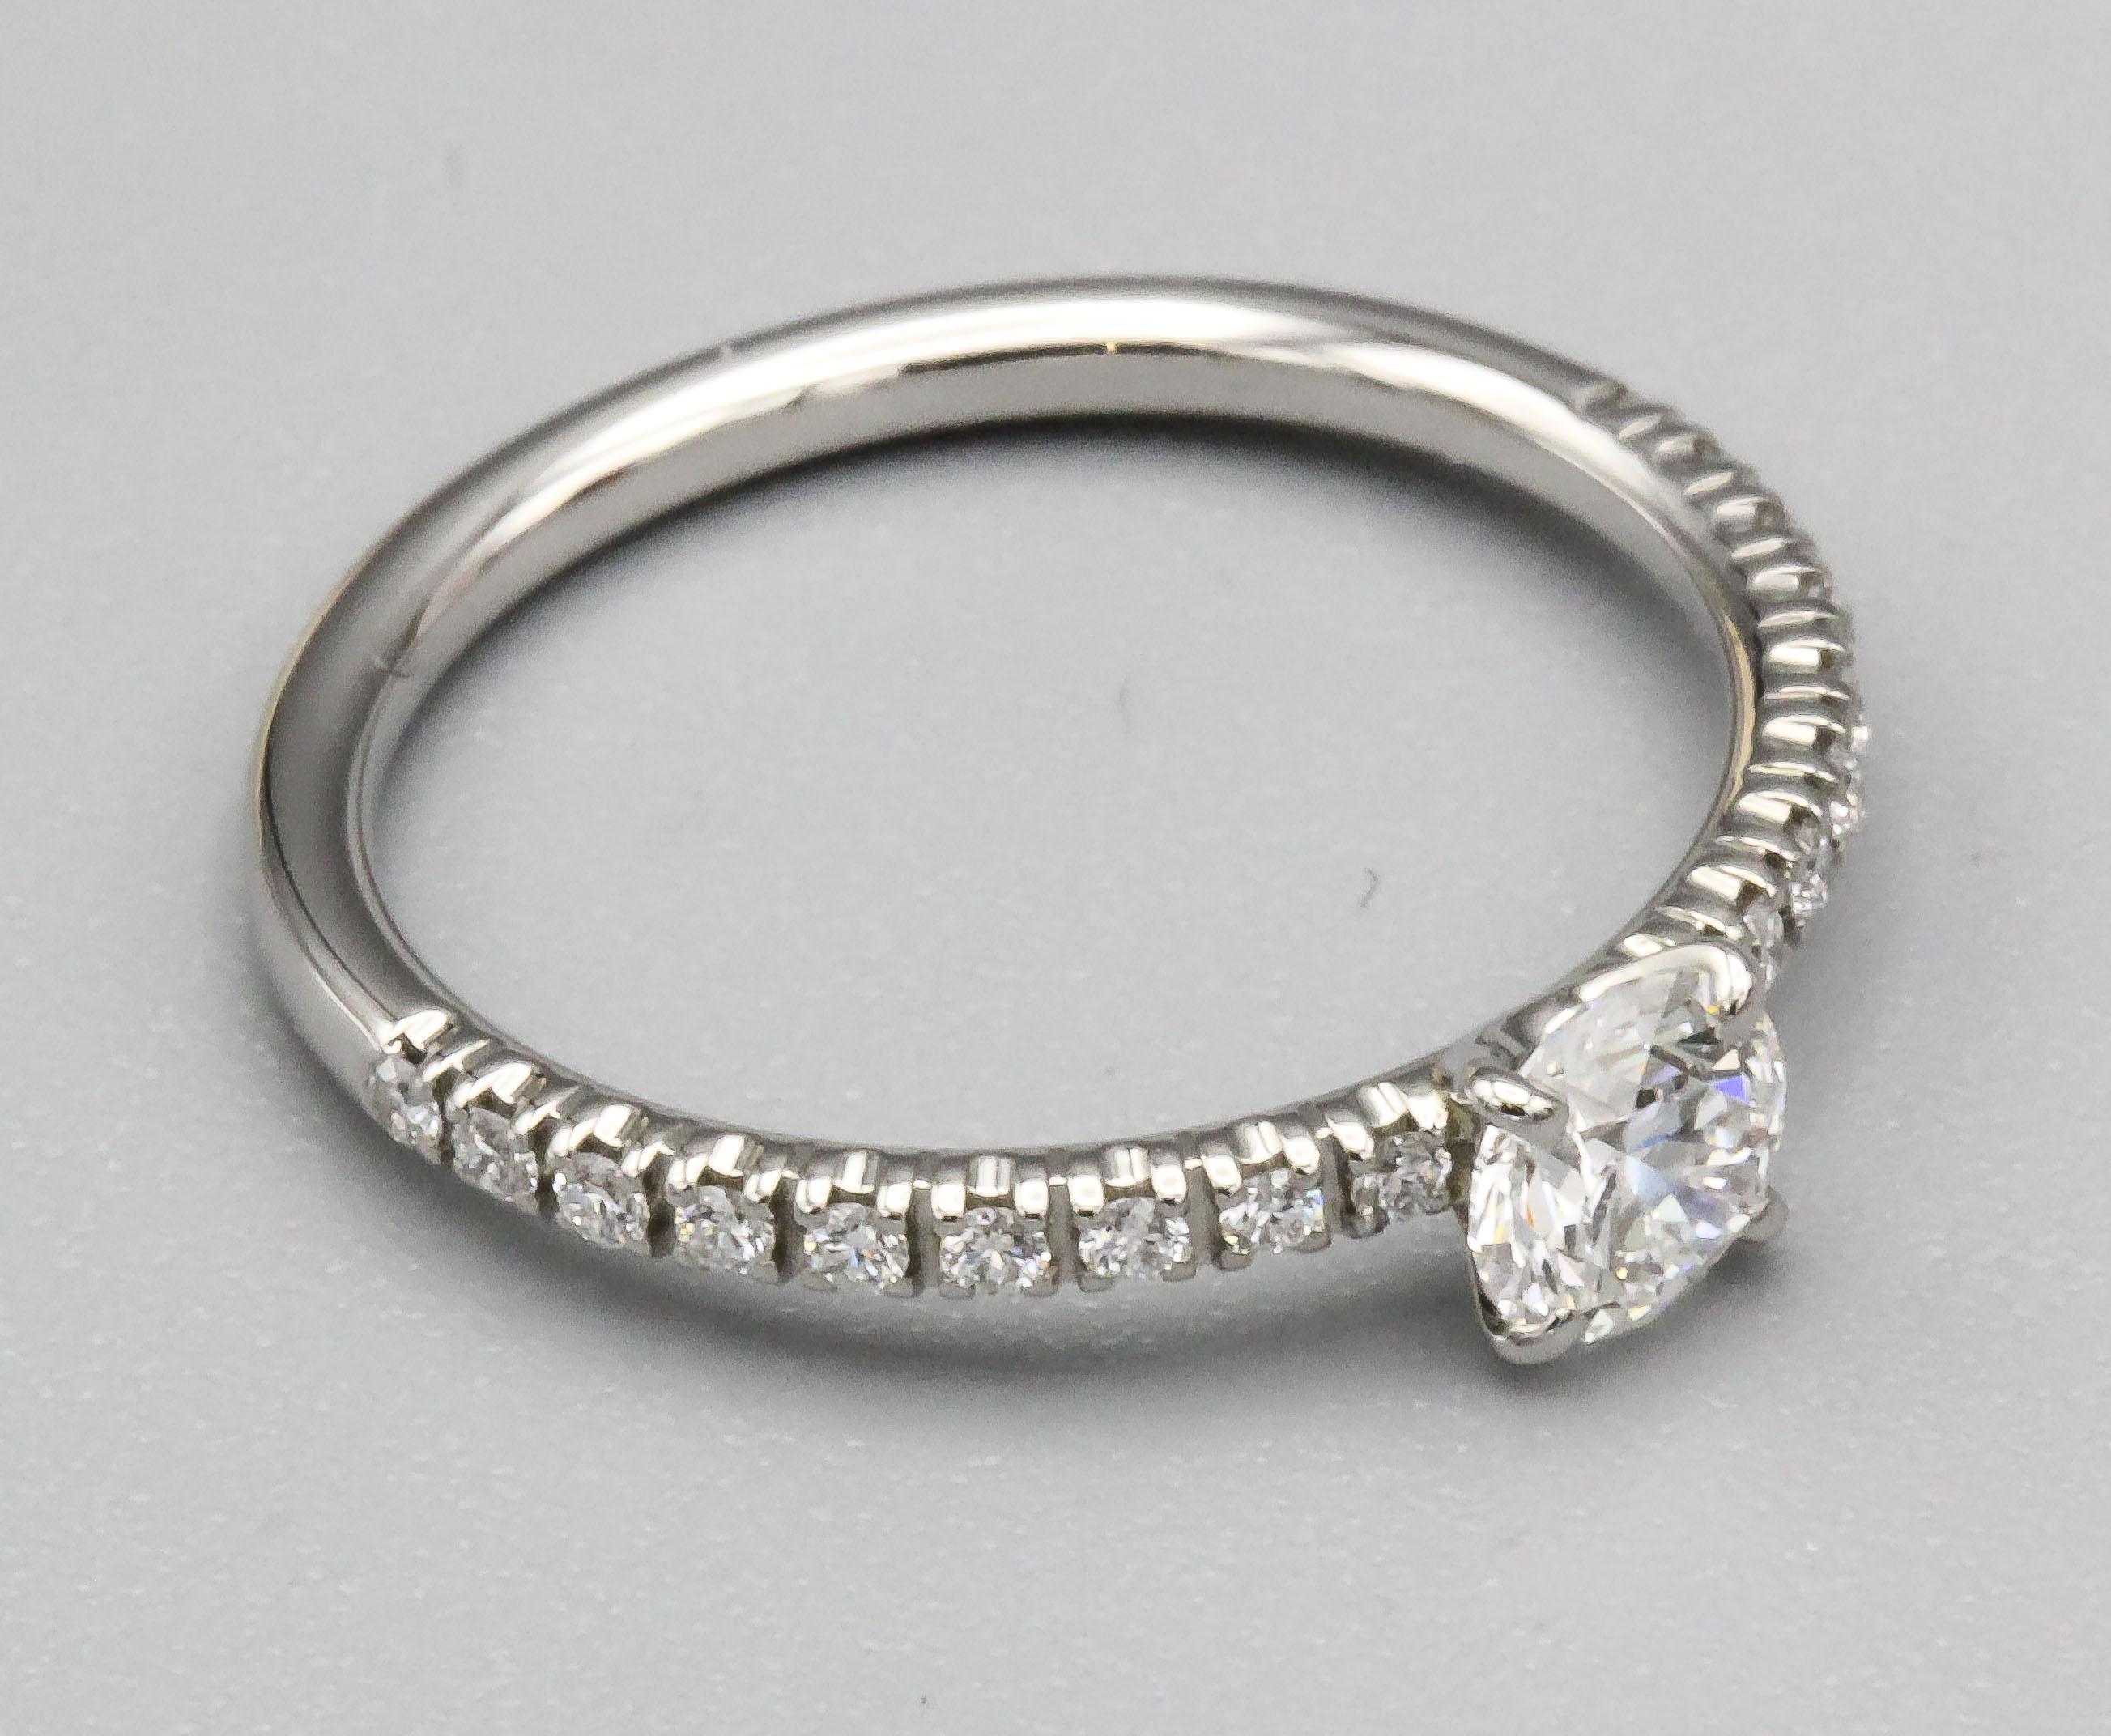 Cartier 0.30 Carat E VS1 Diamond and Platinum Engagement Ring with GIA Report In Good Condition For Sale In Bellmore, NY